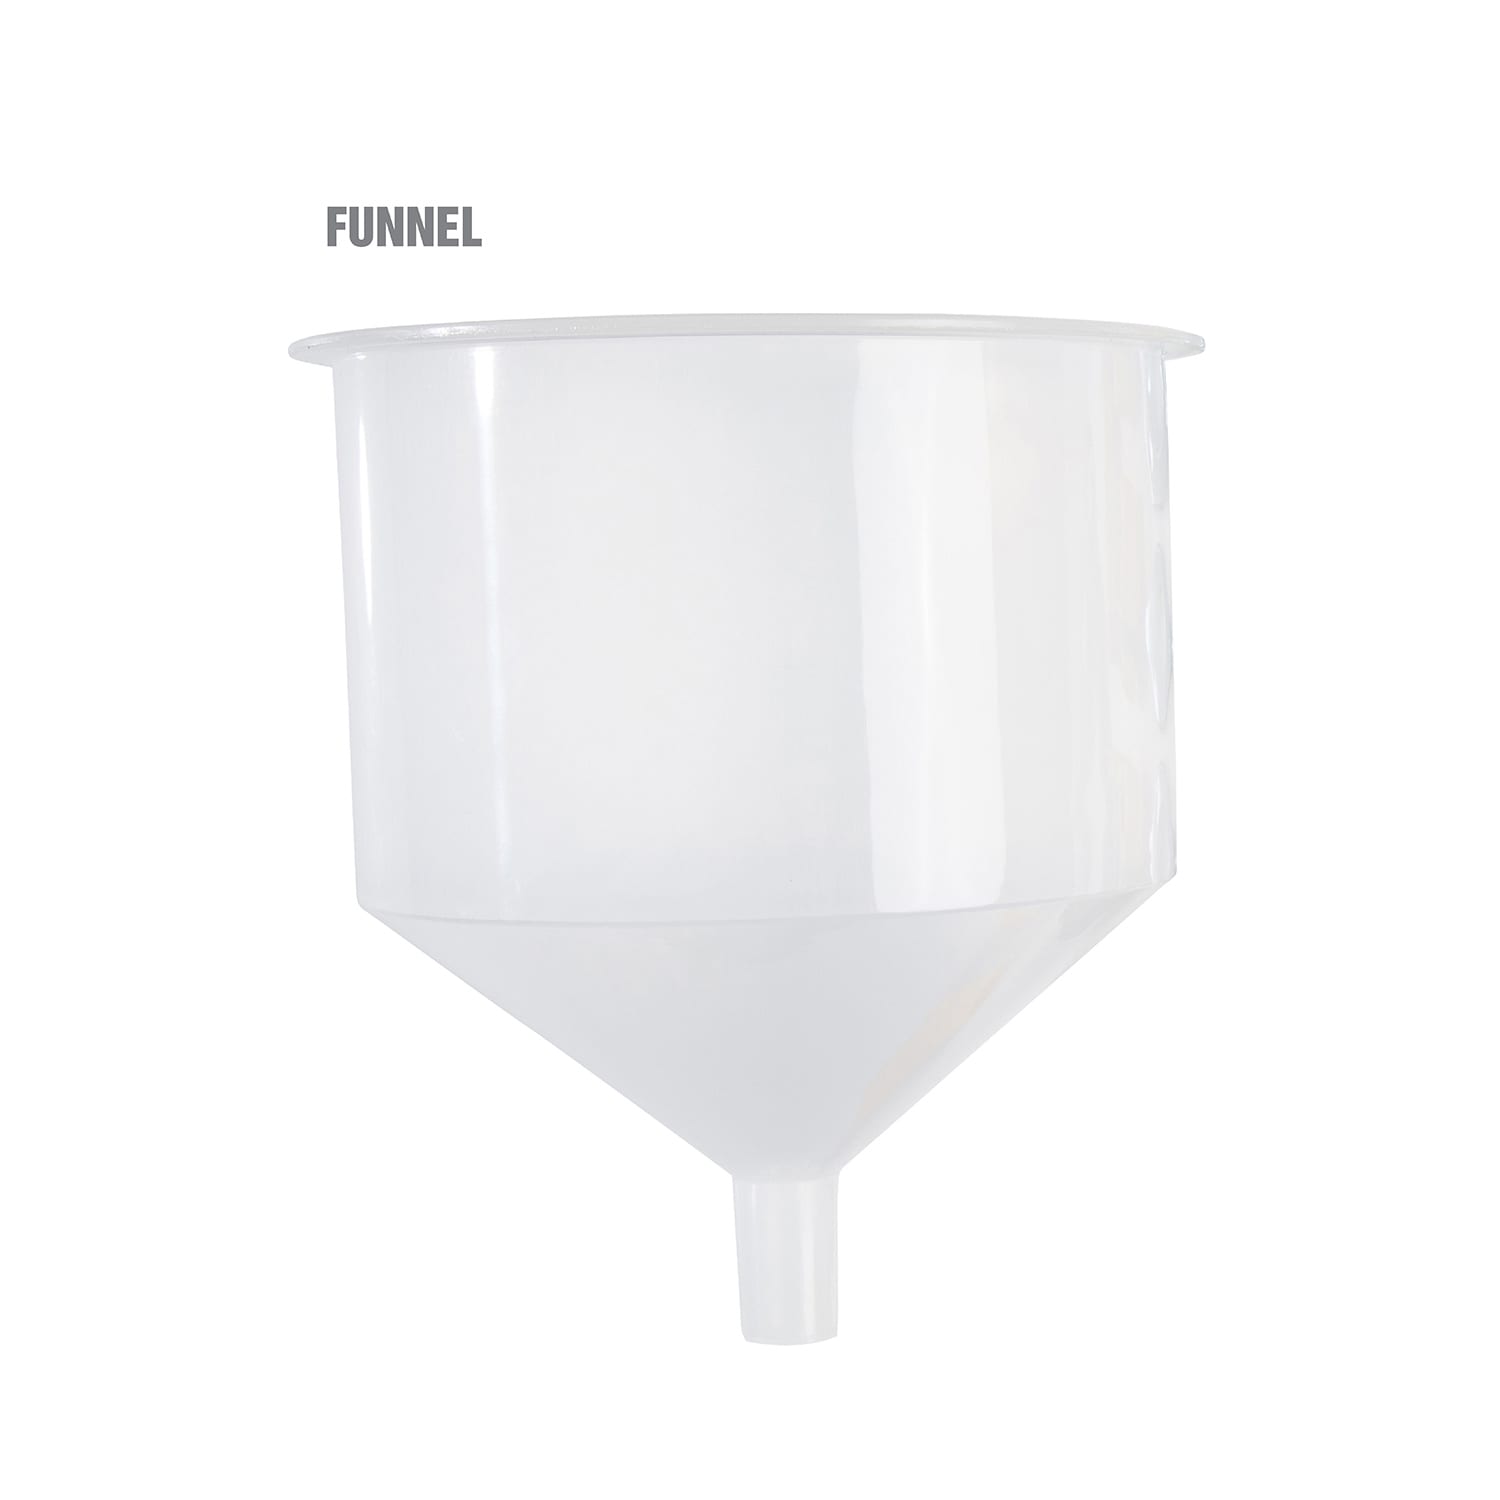  LEIMO KPARTS Spill Proof Coolant Filling Funnel Kit